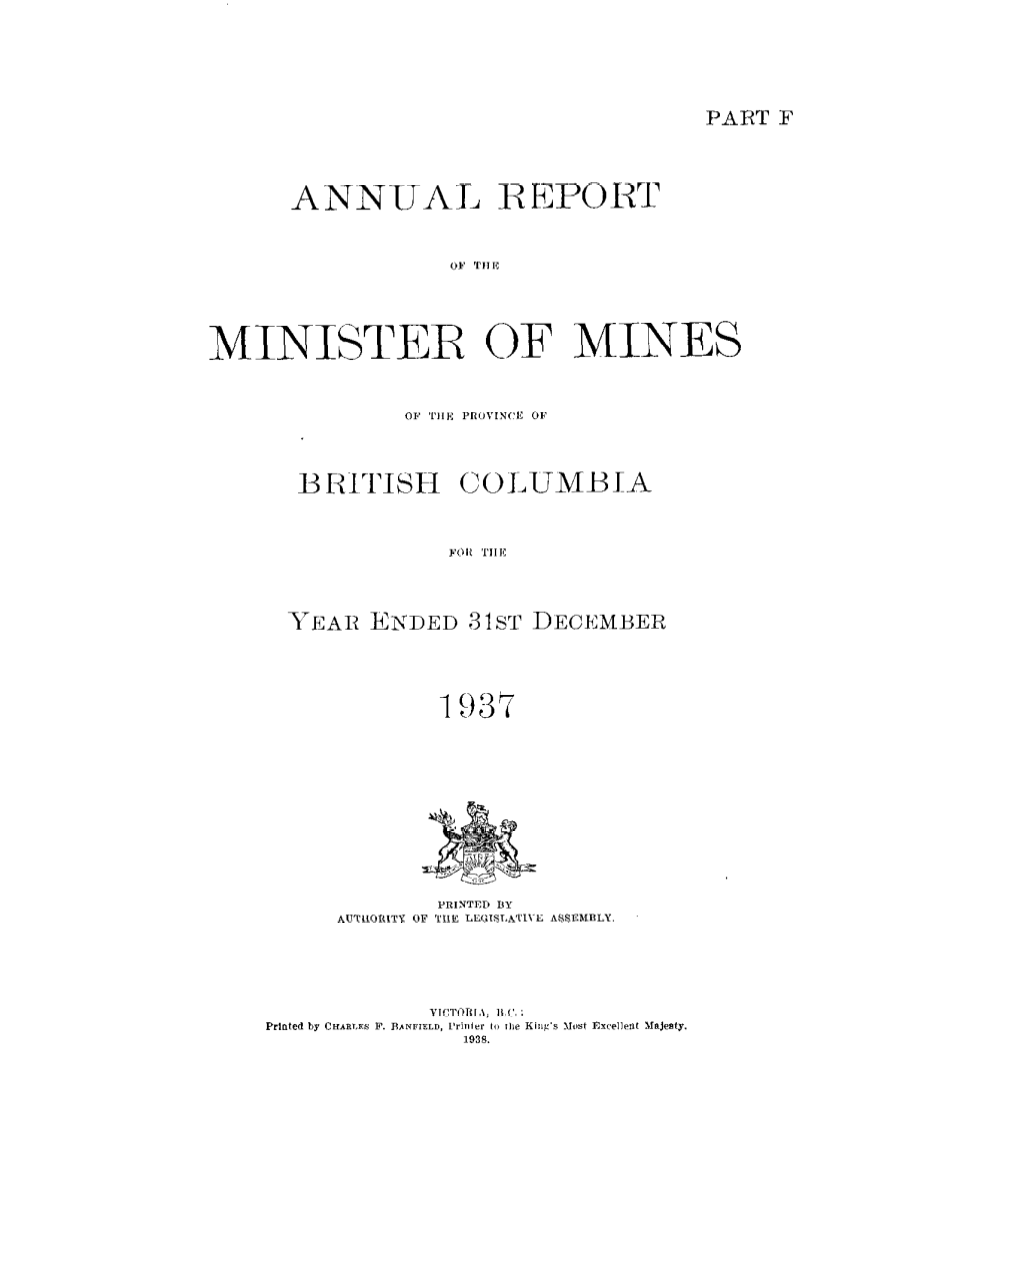 Minister of Mines British Columbia Department of Mines